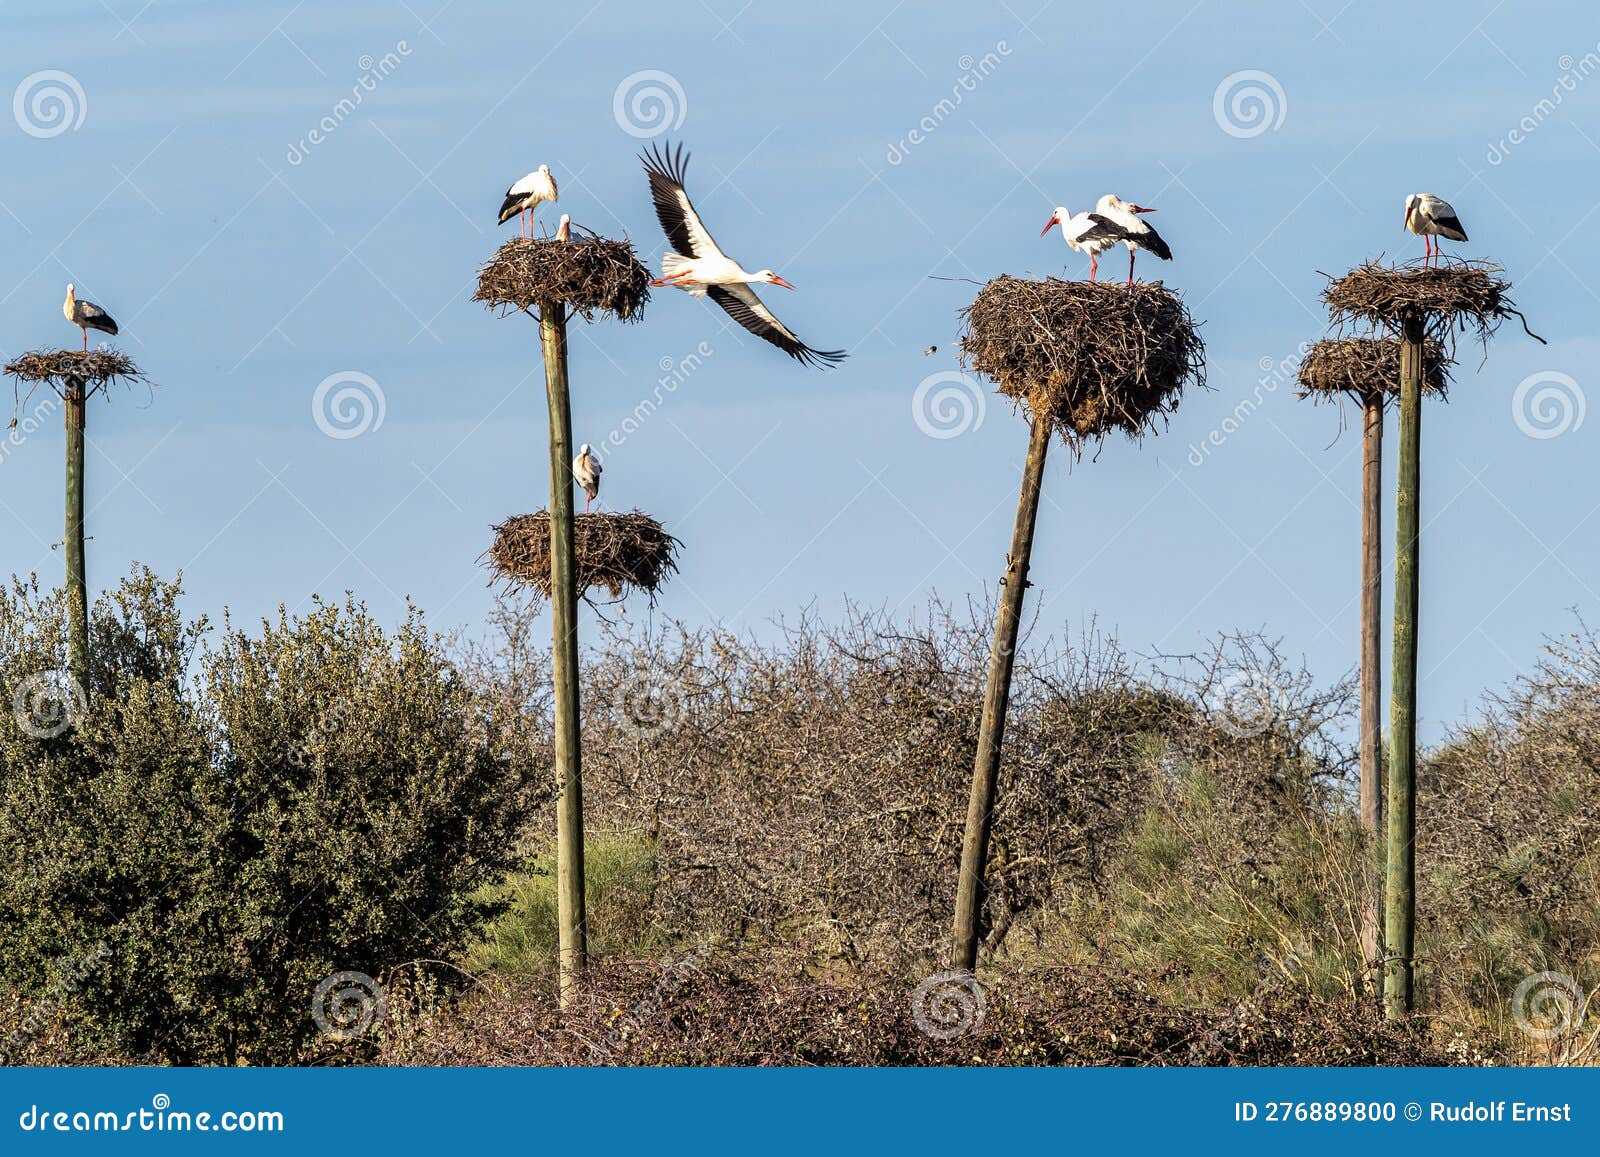 storks colony in a protected area at los barruecos natural monument, malpartida de caceres, extremadura, spain